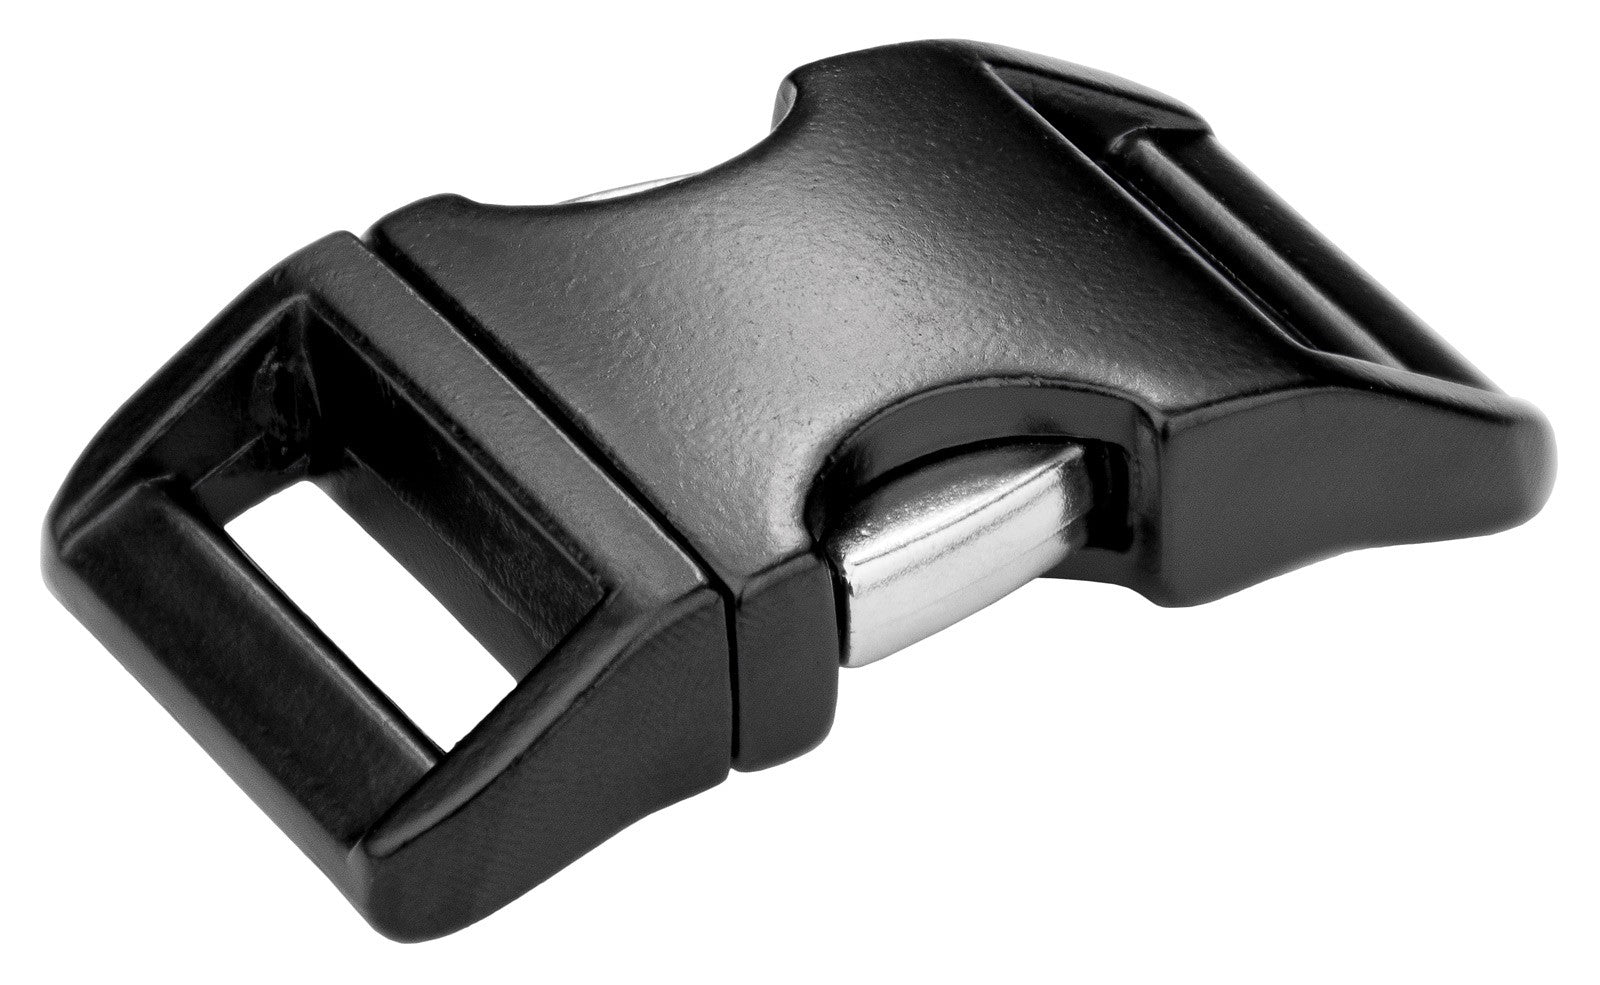 25 1 Contoured Plastic Buckles 1 Inch Adjustable Curved Buckles 